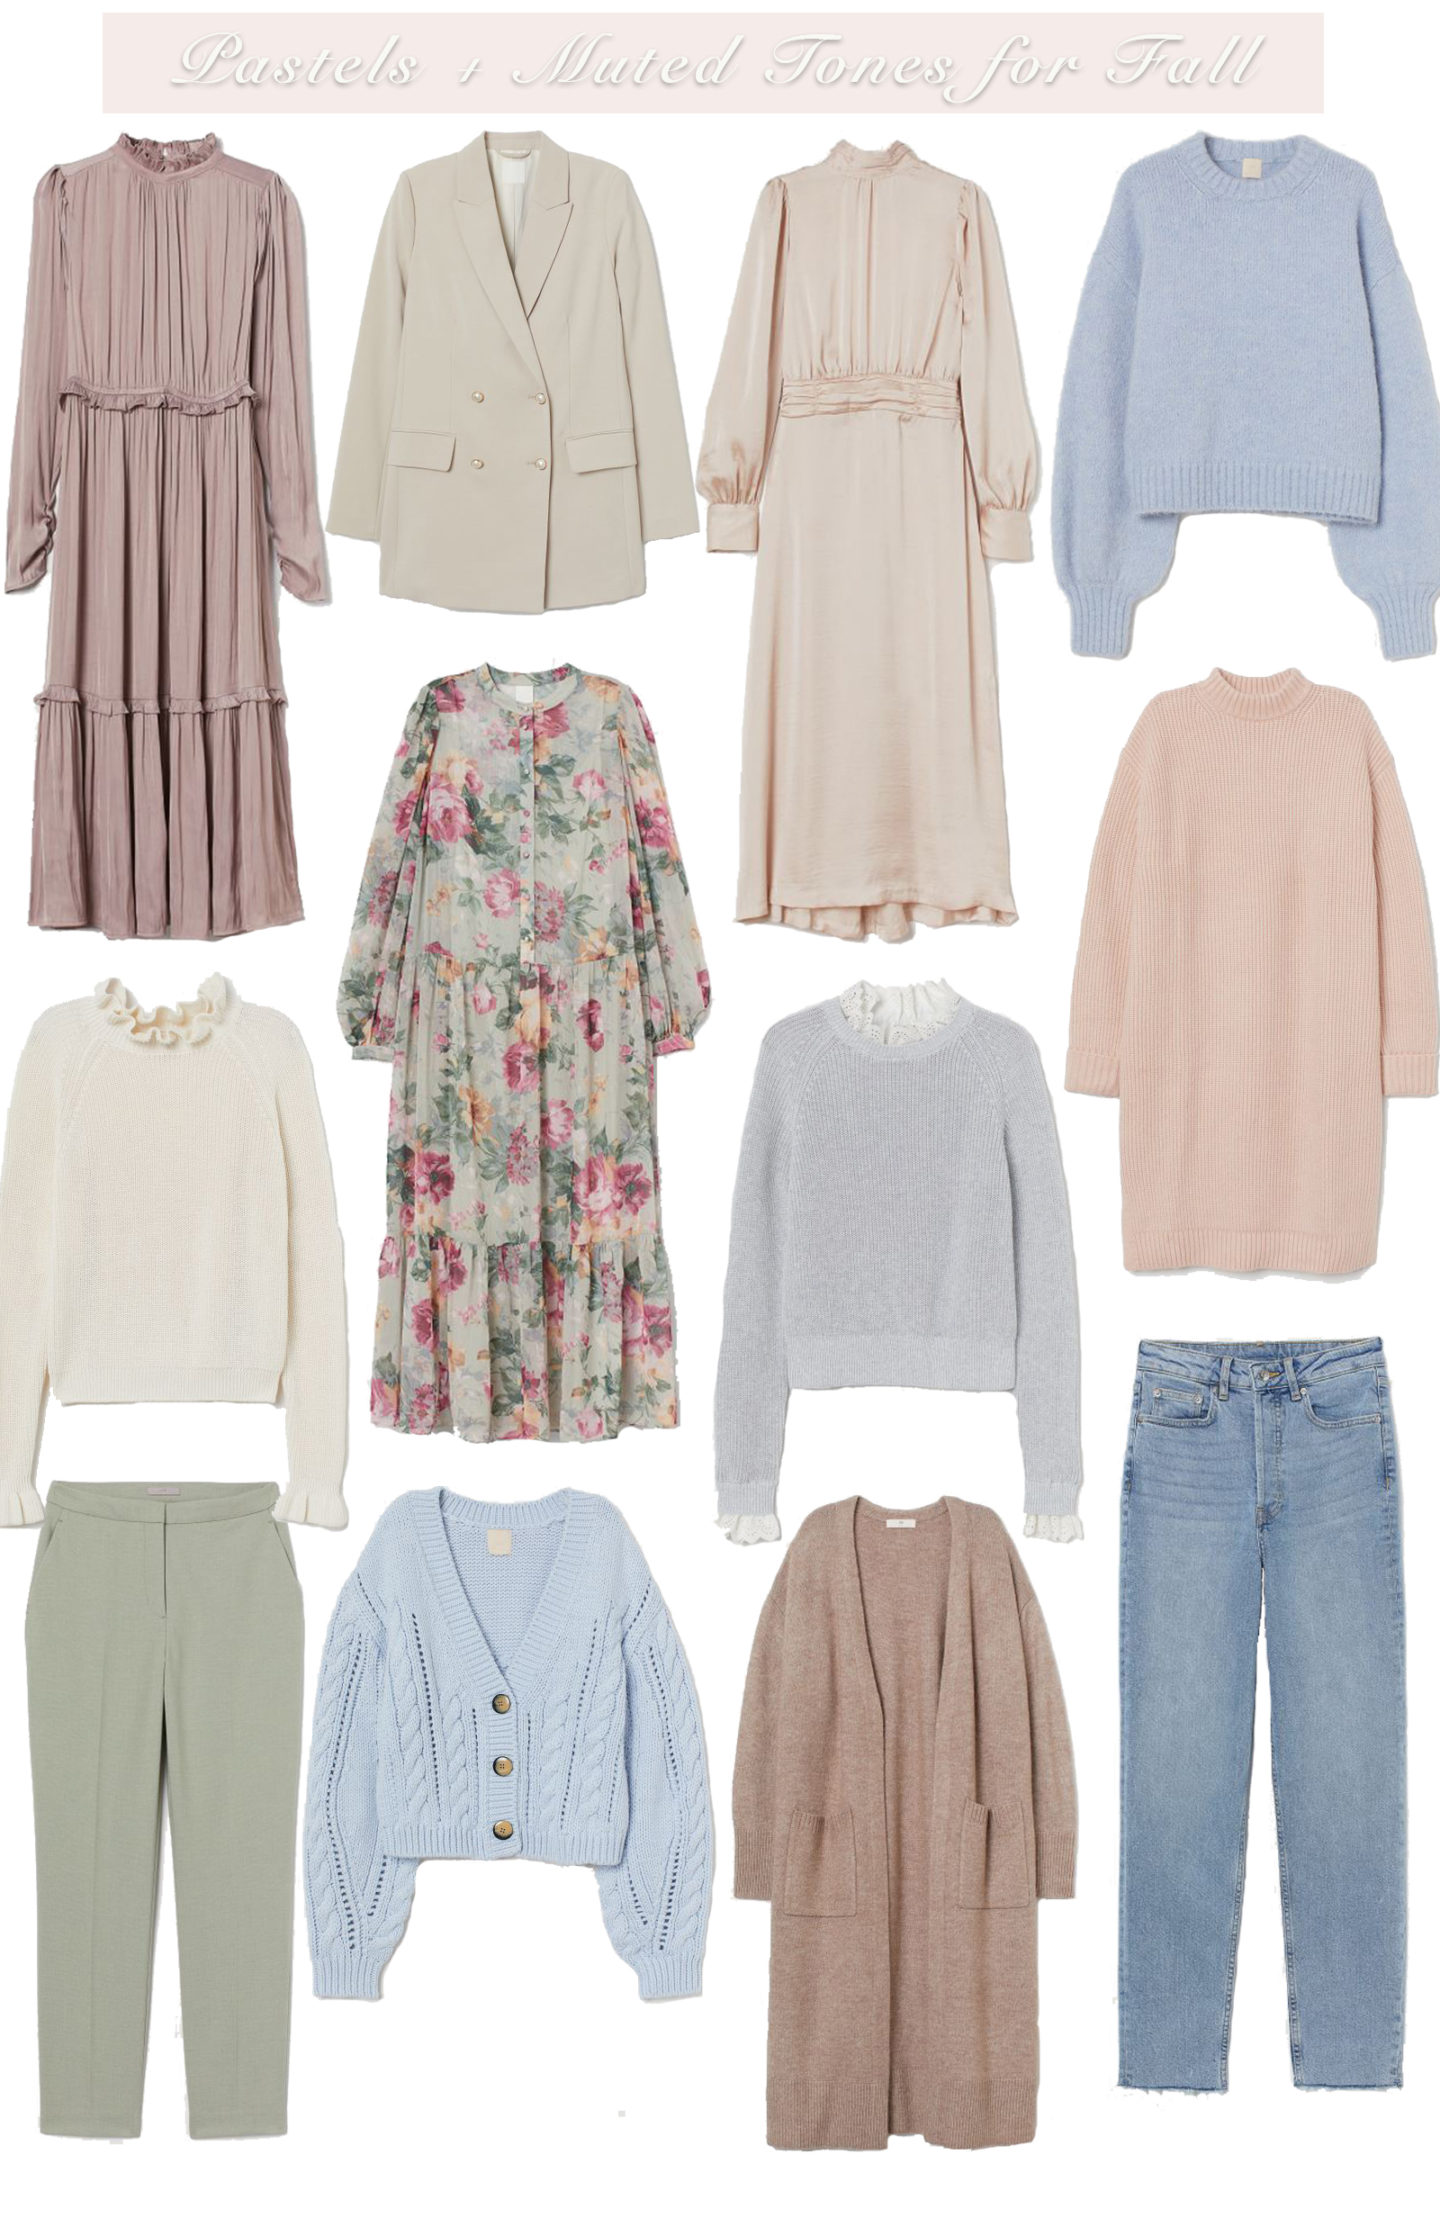 Pastel + Muted Tones for Fall